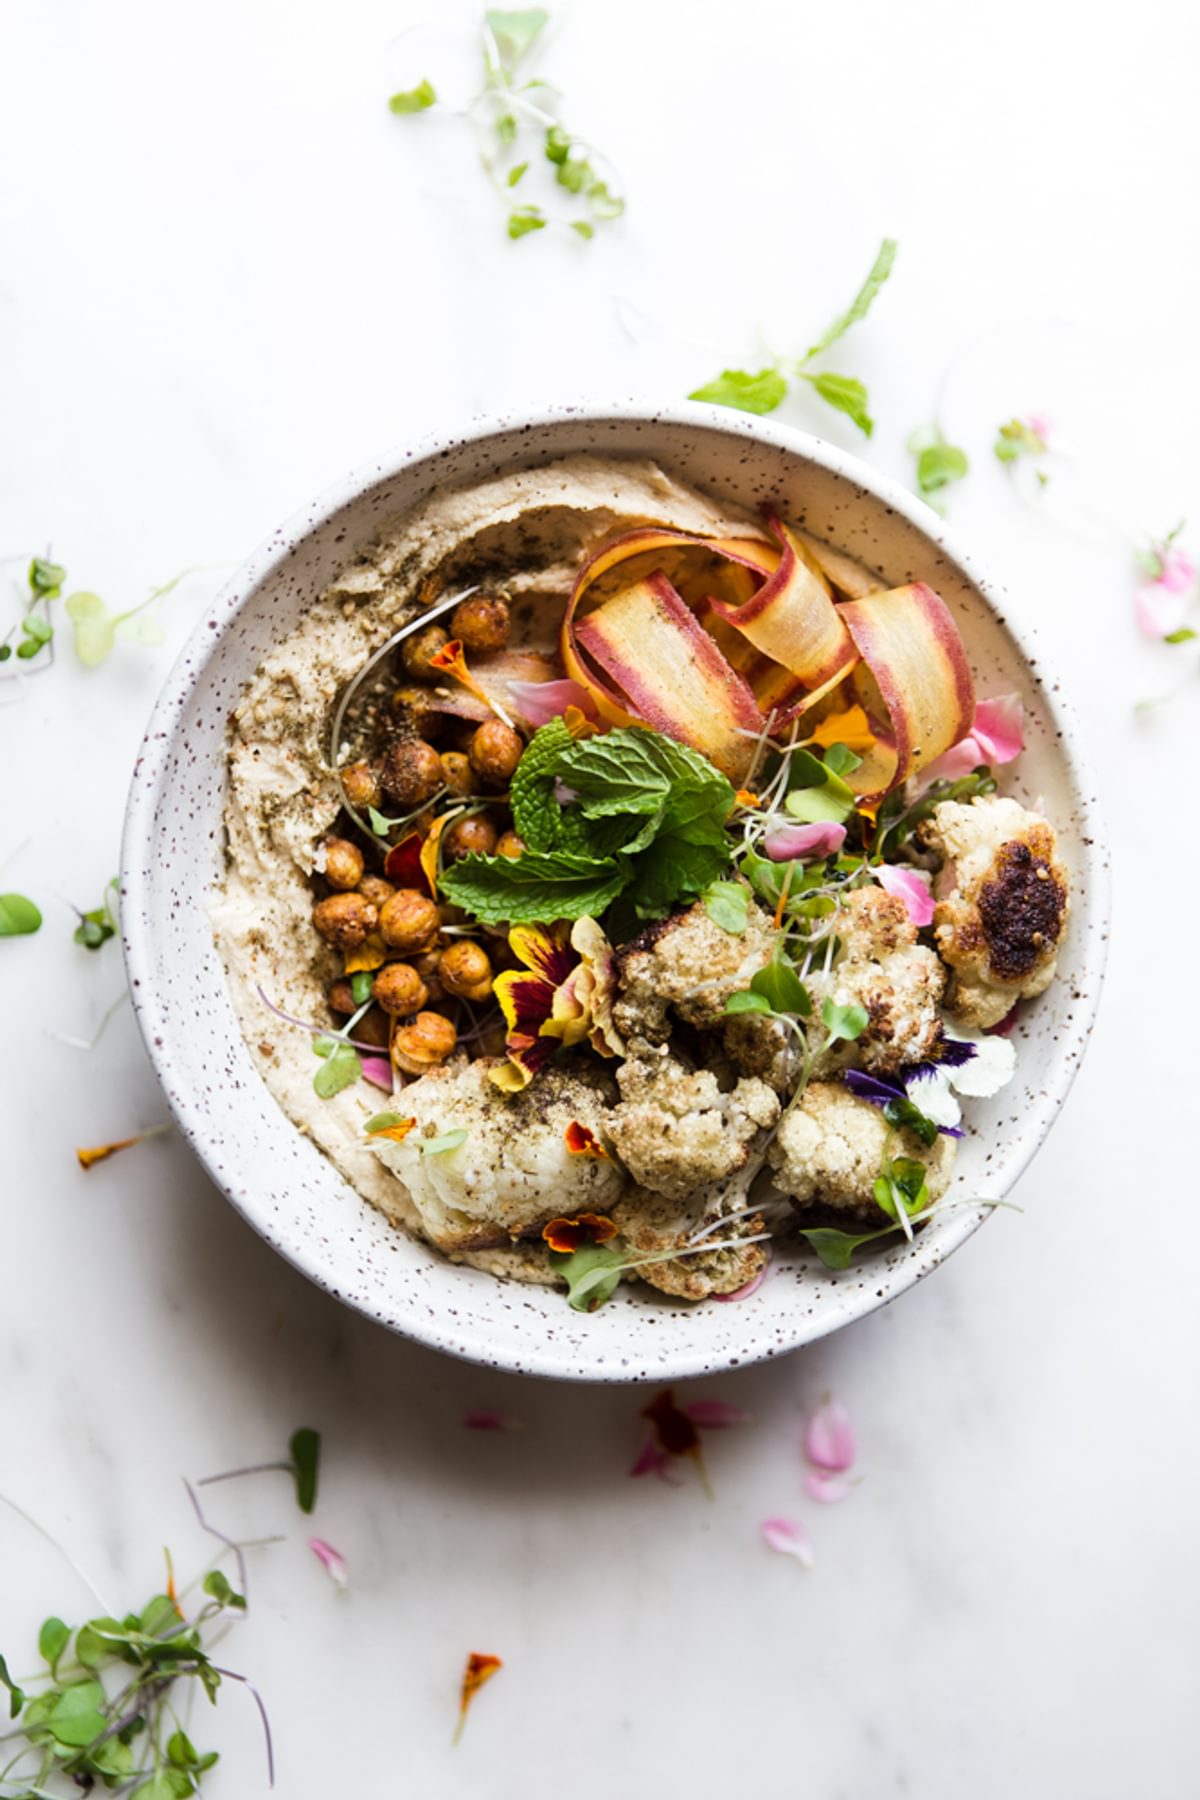 roasted cauliflower and hummus bowl with carrots, mint and spiced chickpeas.